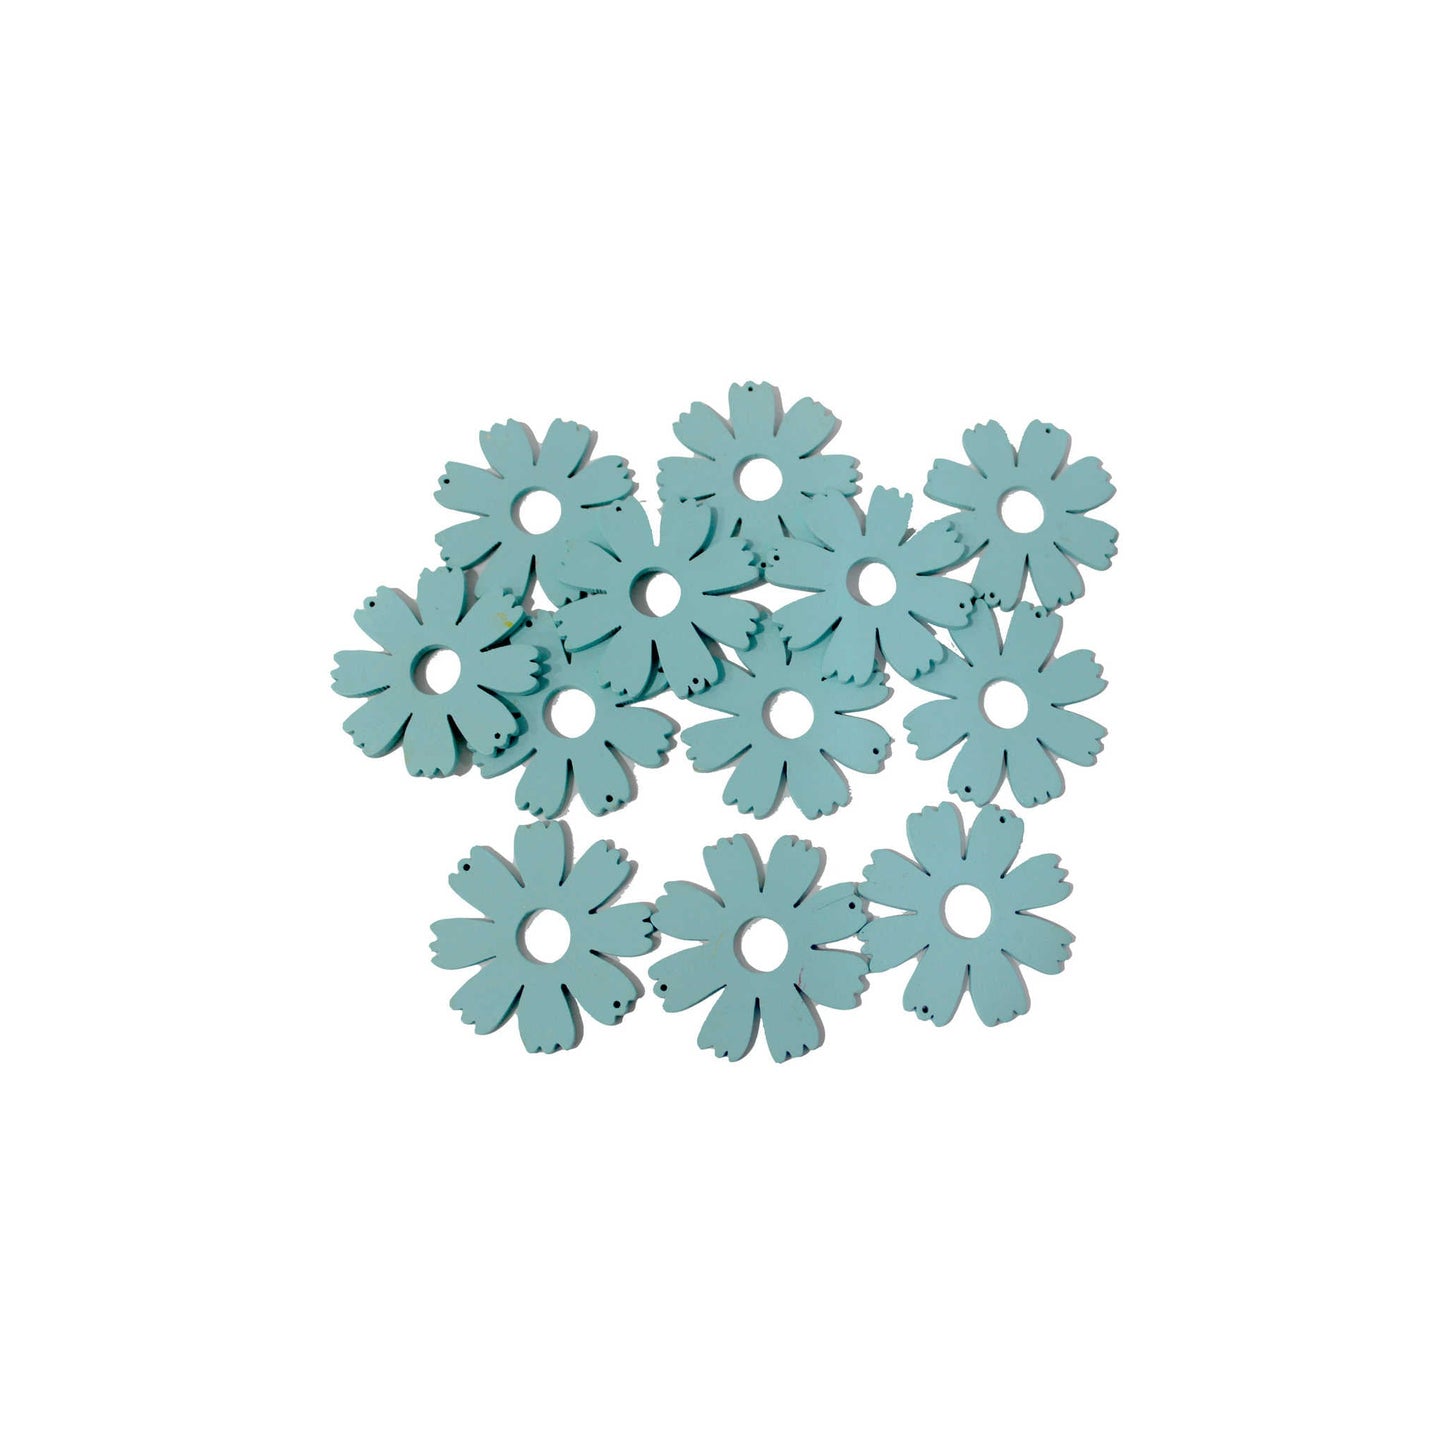 Indian Petals MDF Cutting Floral Motif for Jewelry, Craft or Decoration - 520, Big, Powder Blue